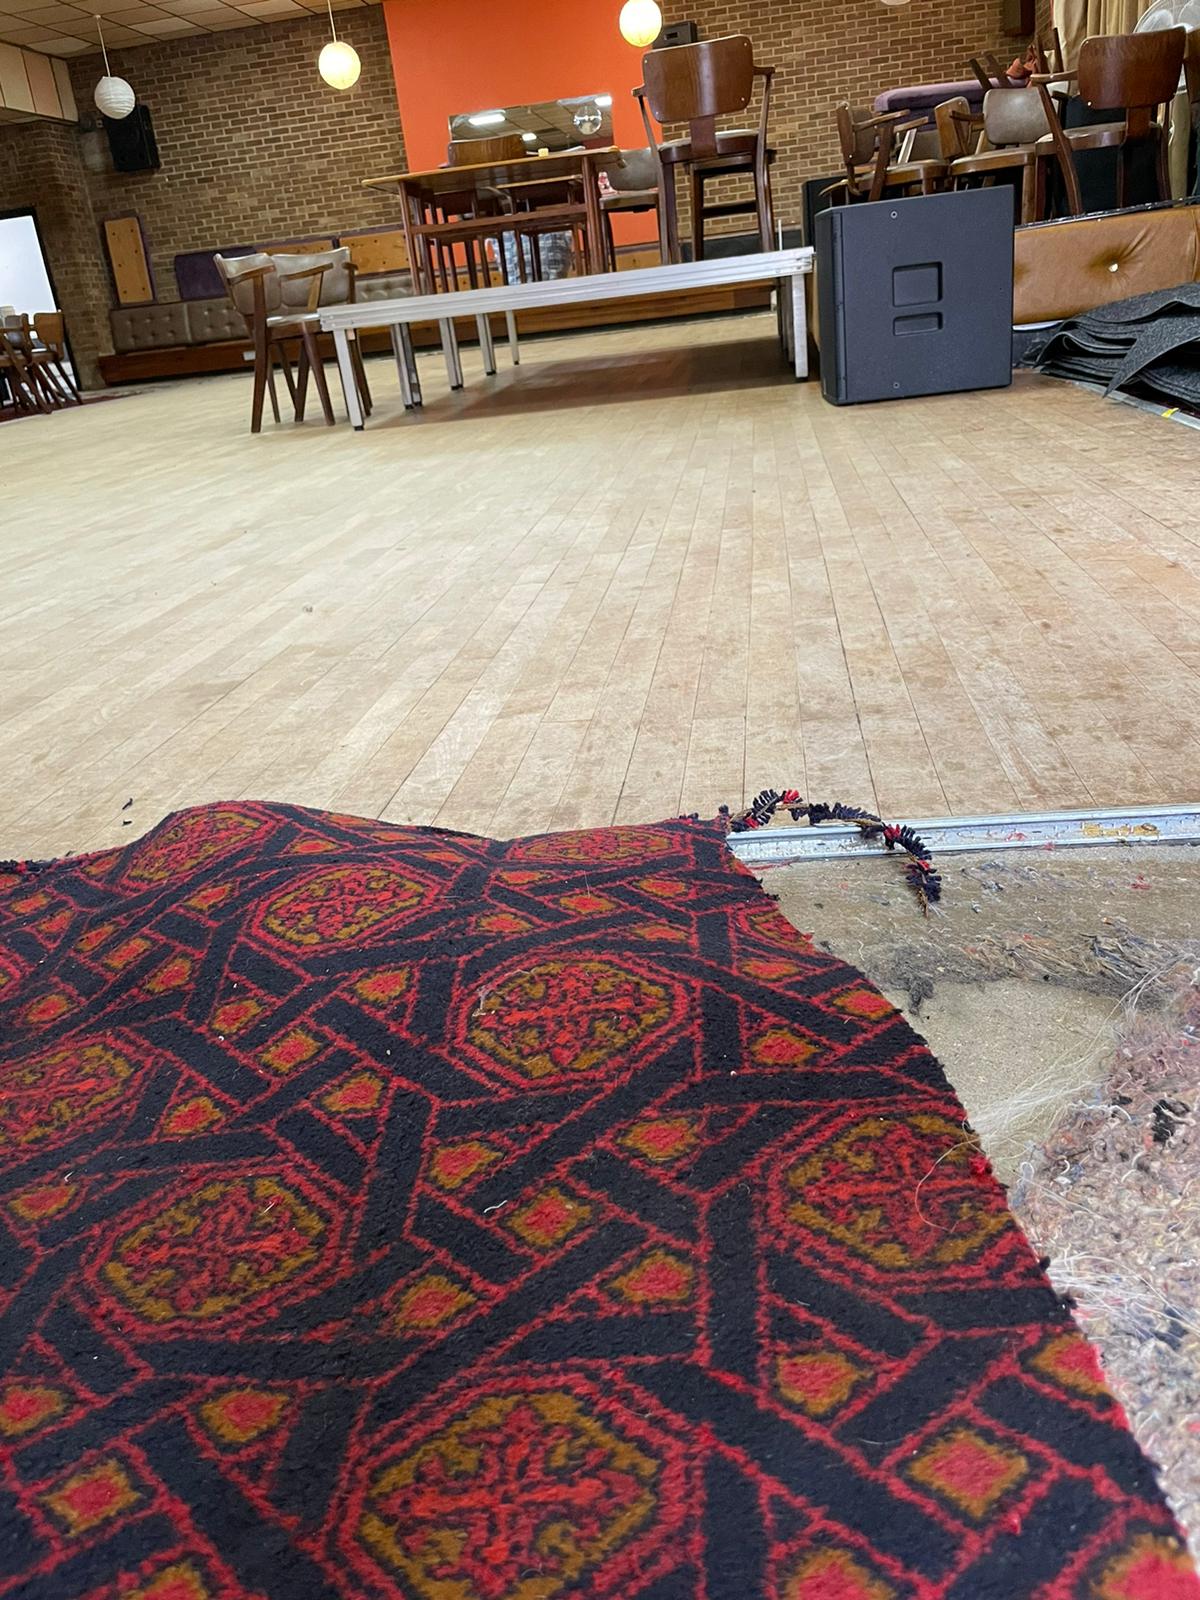 A dancefloor at a social club in Walthamstow may well have been saved by volunteers